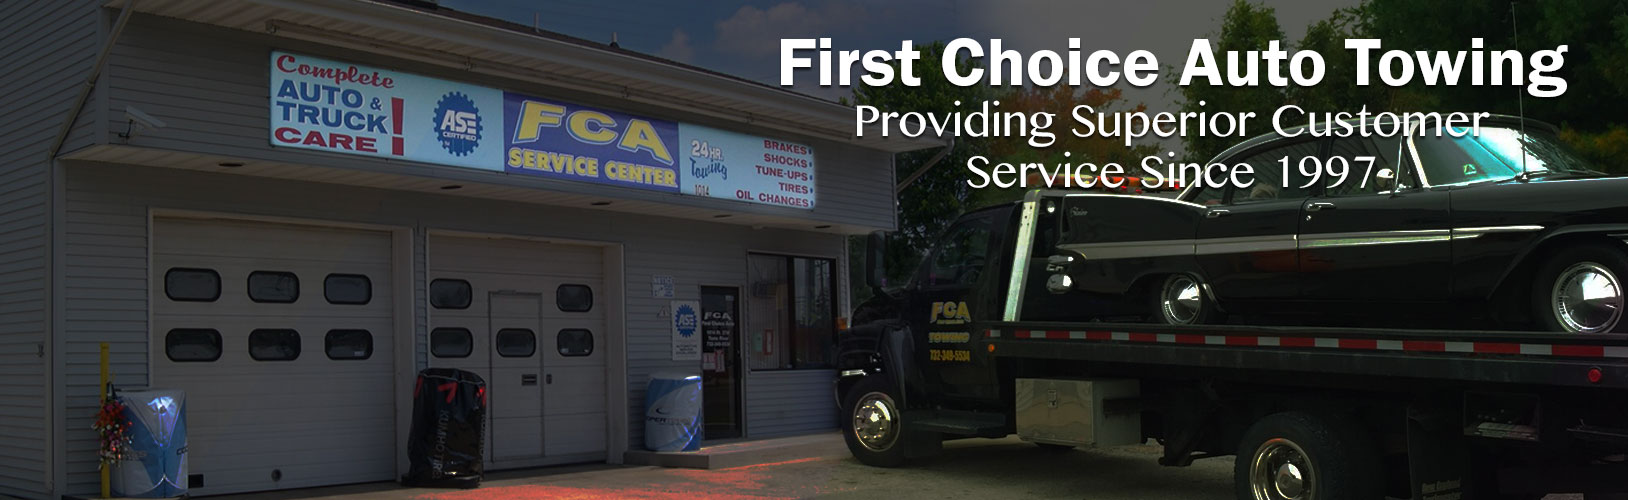 First-Choice-Auto-Towing-Header2-About-Page